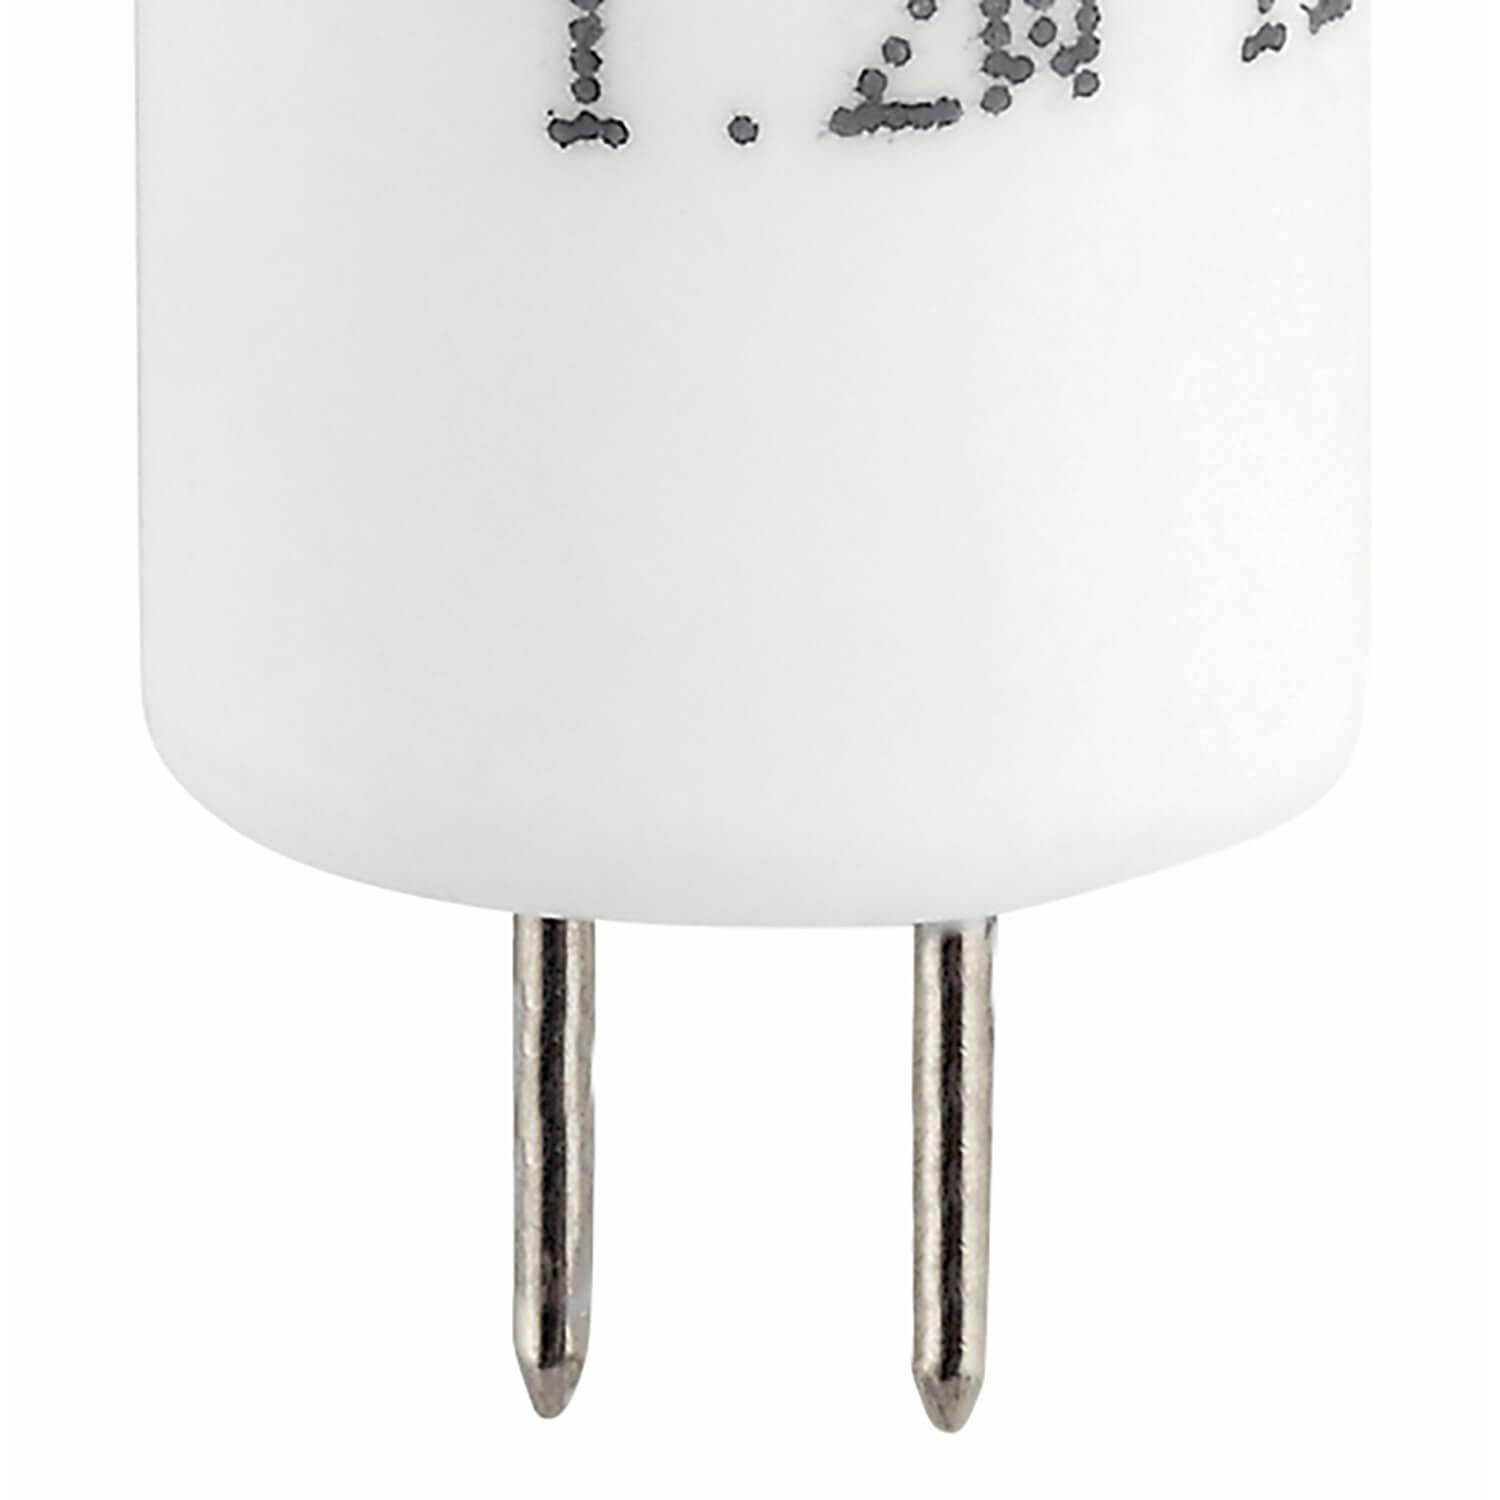 3000K LED T3 and G4 Bi-Pin 1W 180 Degree on a white background